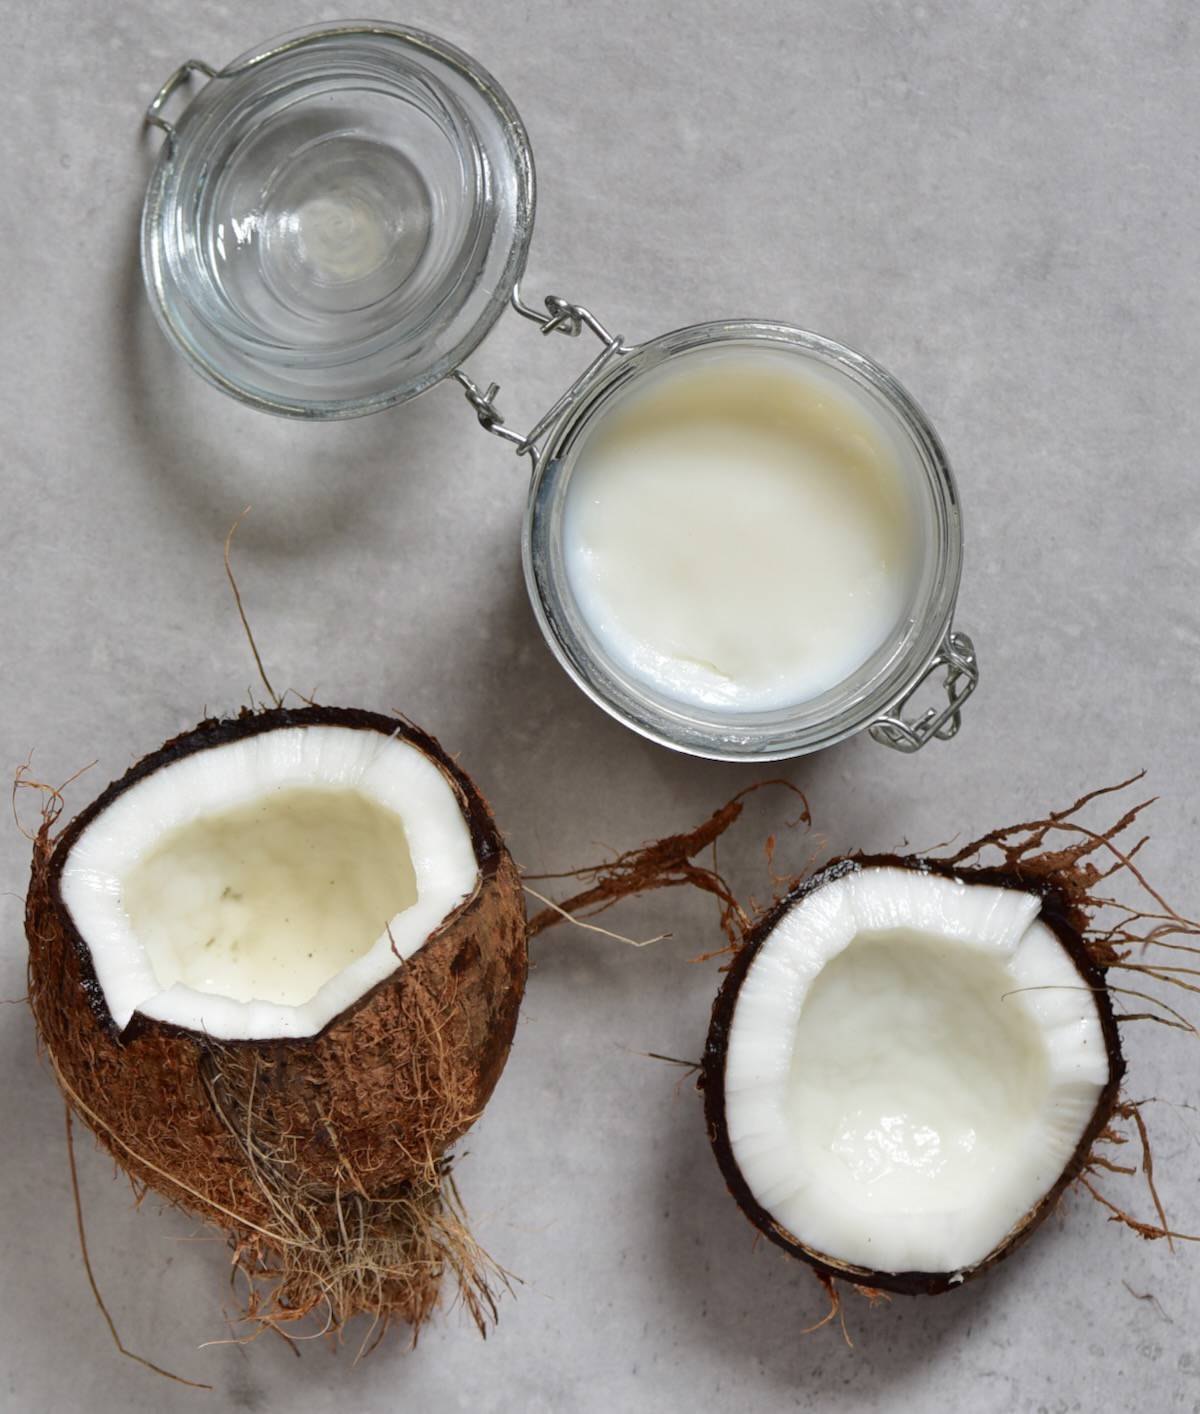 How to Make Coconut Oil - Alphafoodie